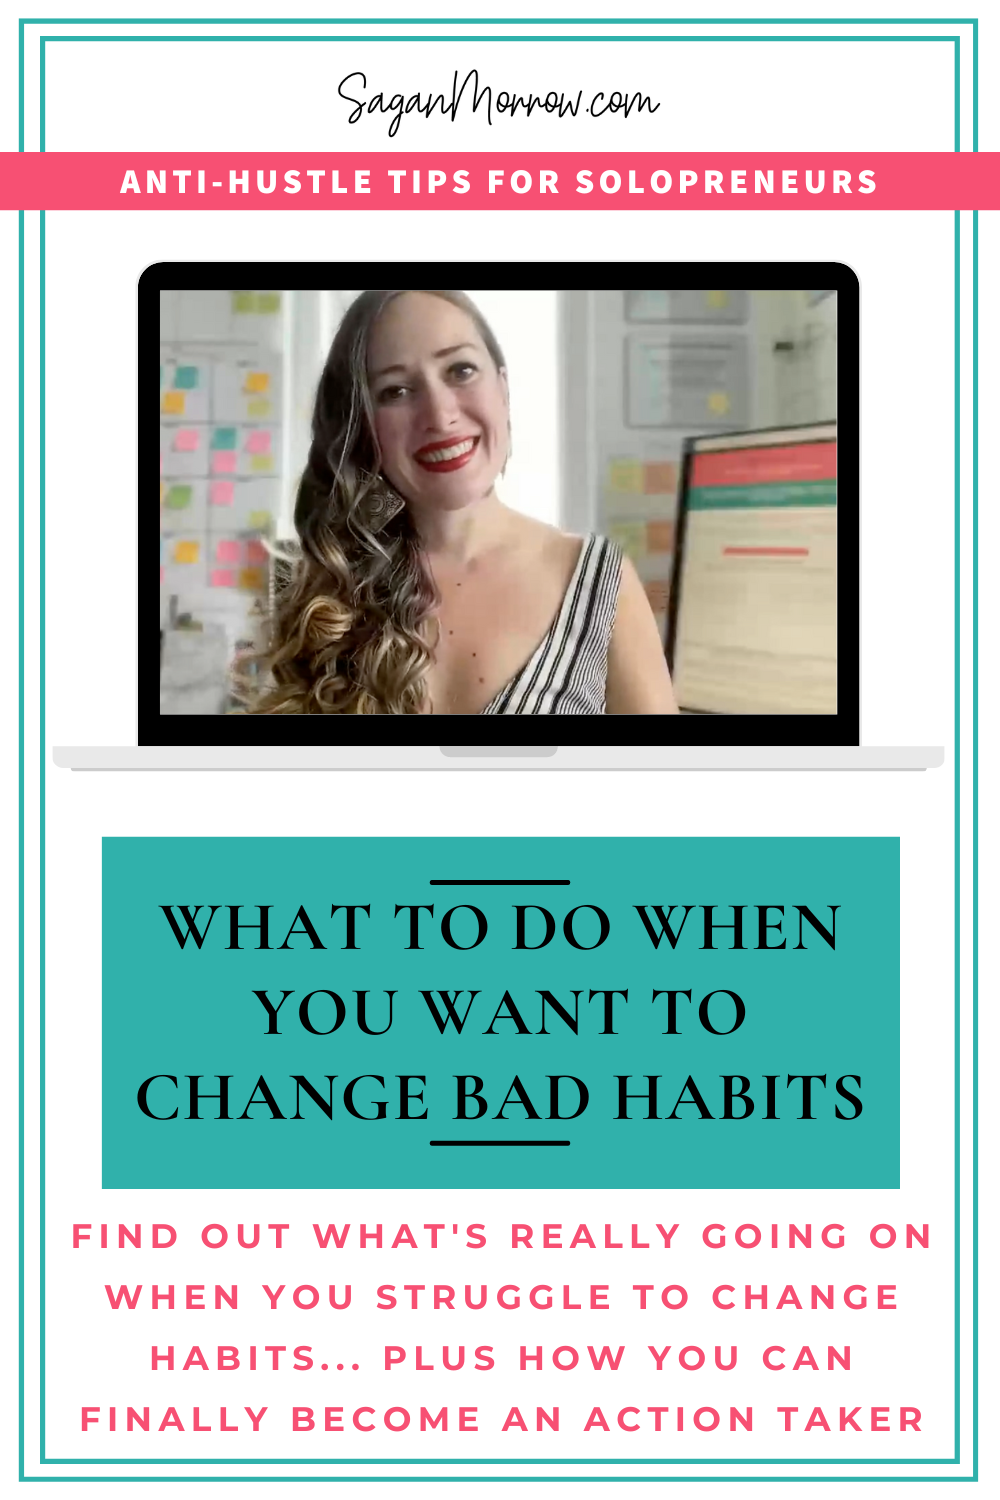 why am I not taking action? Find out what's really going on when you struggle to change bad habits... and what you can do to become an action taker